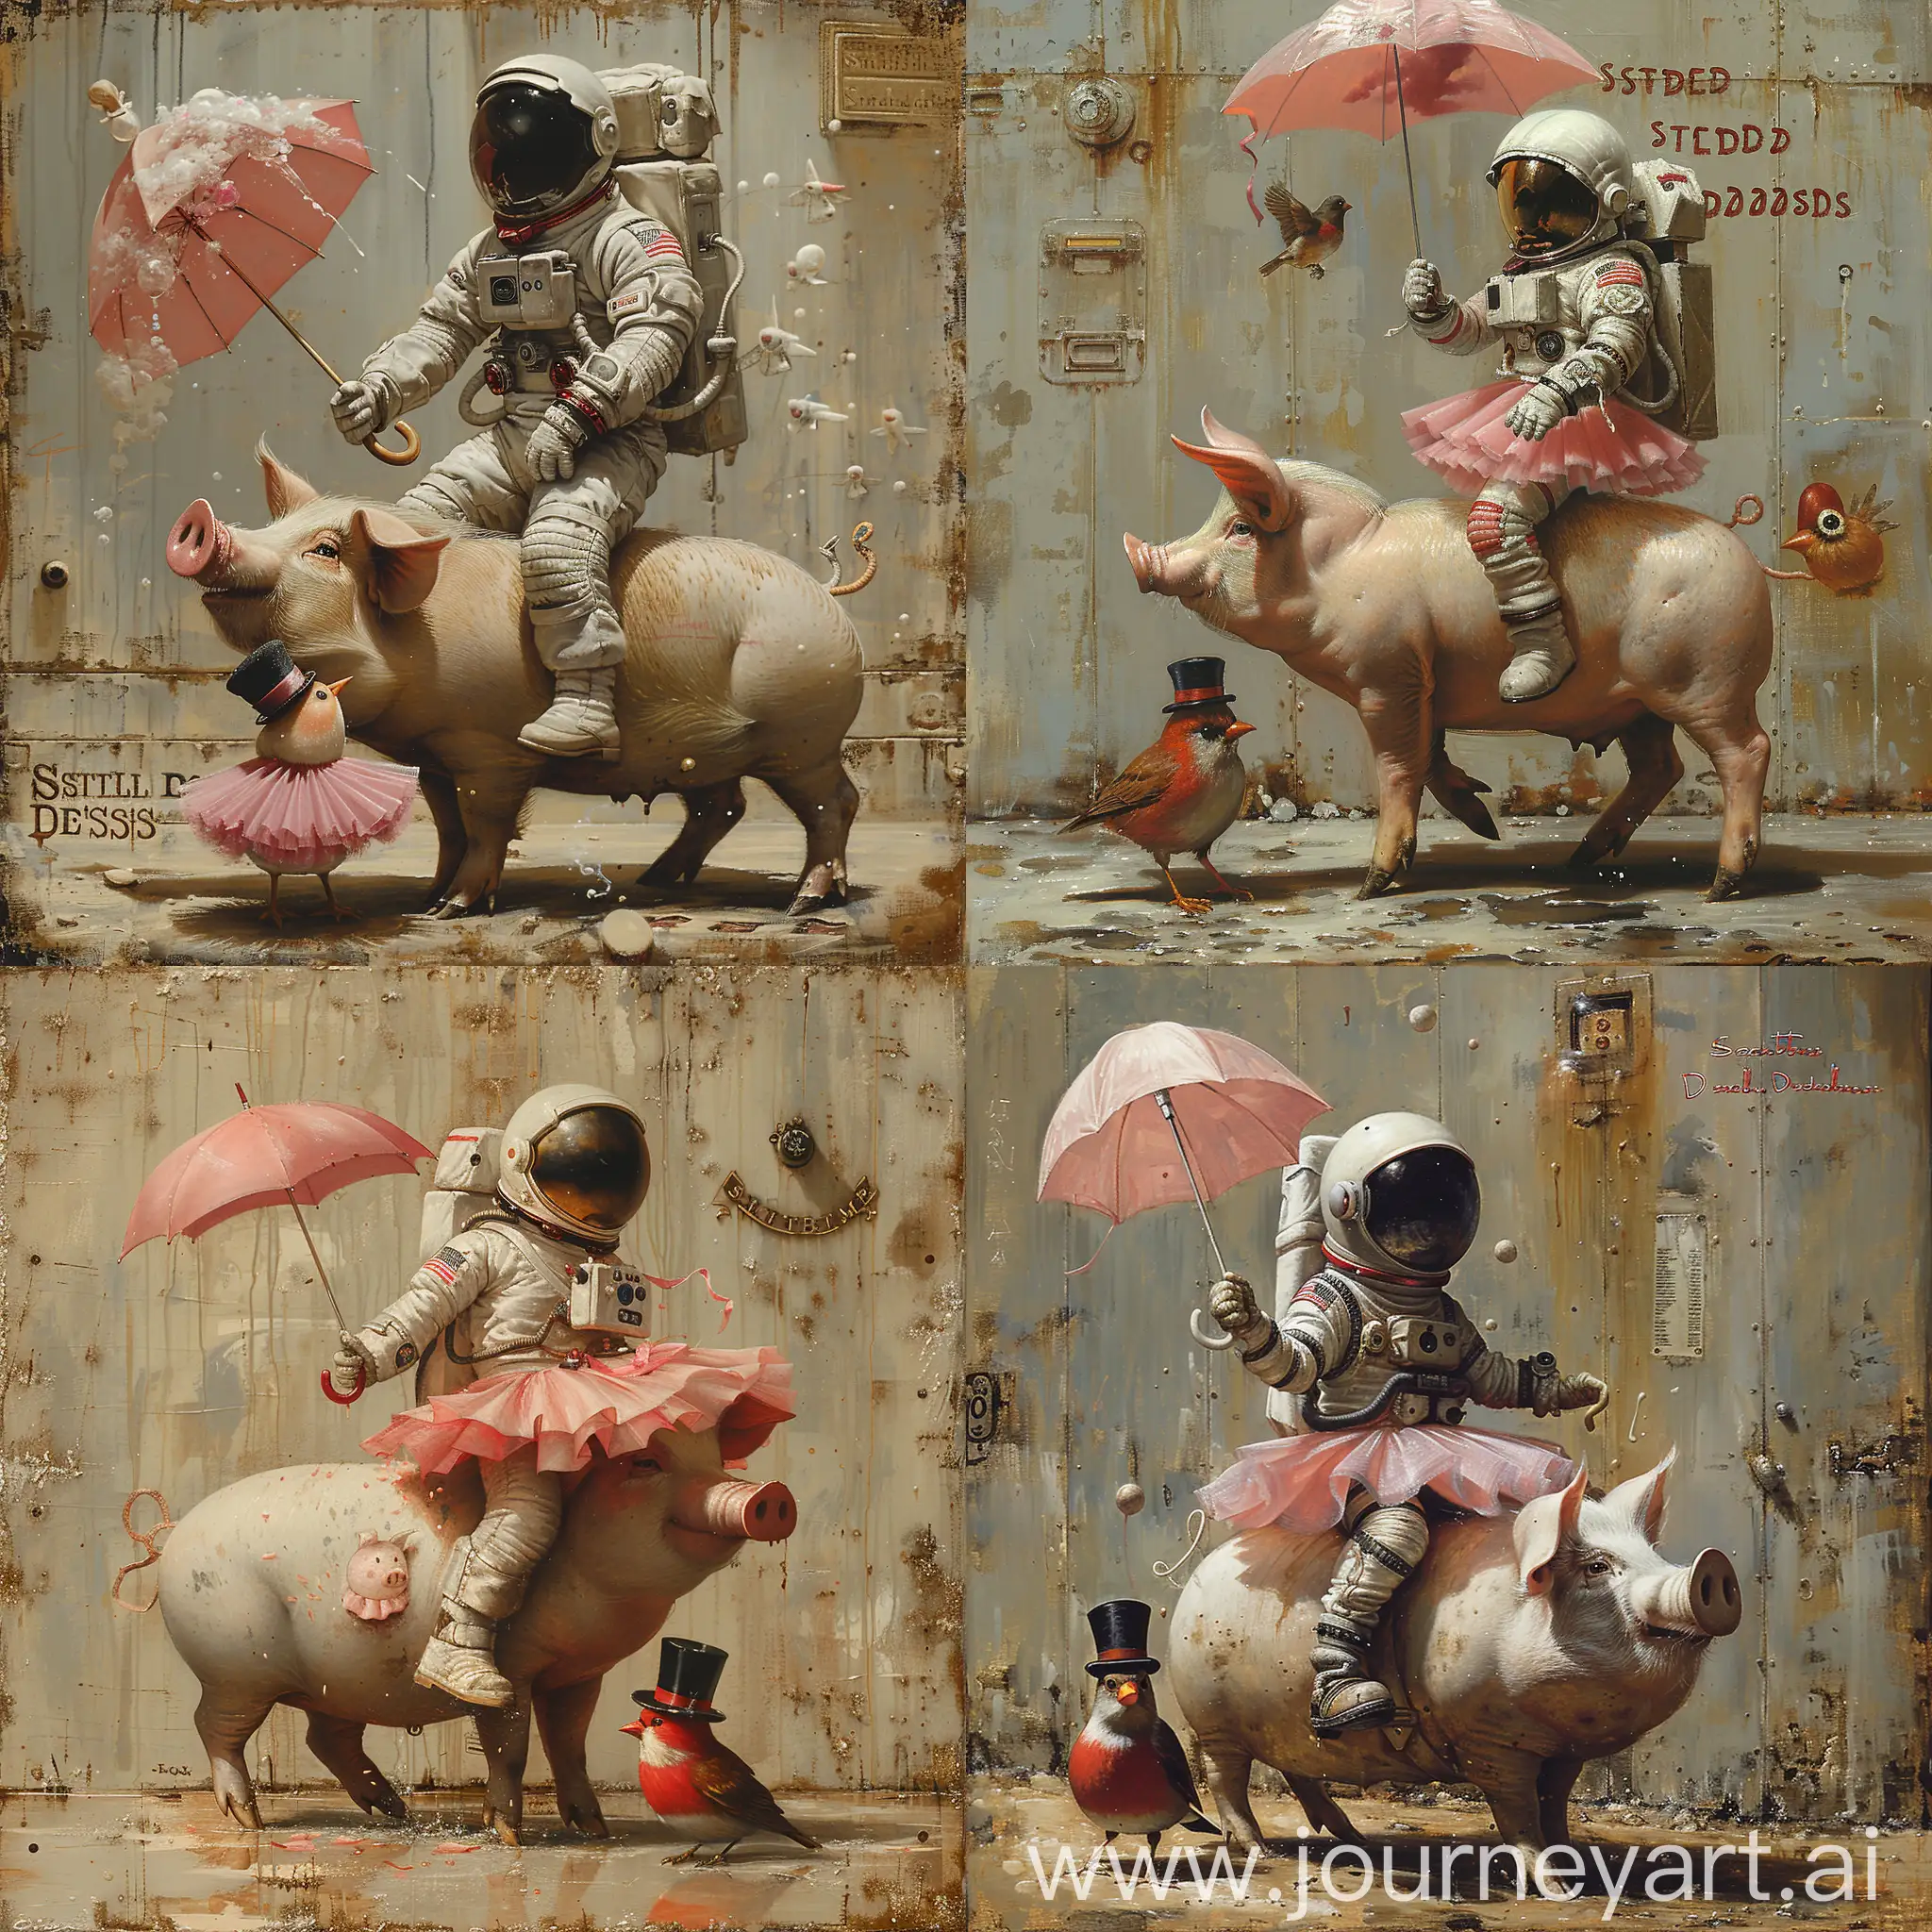 A painting of an astronaut riding a pig wearing a tutu holding a pink umbrella, on the ground next to the pig is a robin bird wearing a top hat, in the corner are the words ‘stable diffusion --style raw --stylize 750